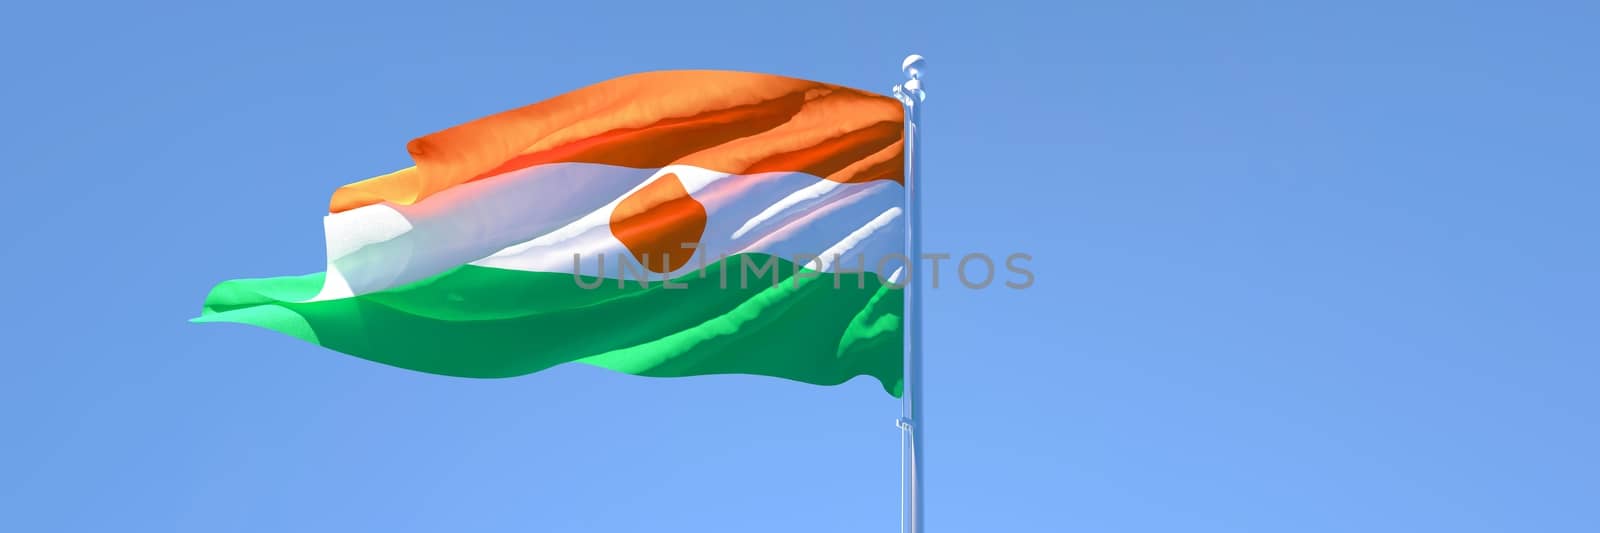 3D rendering of the national flag of Niger waving in the wind against a blue sky